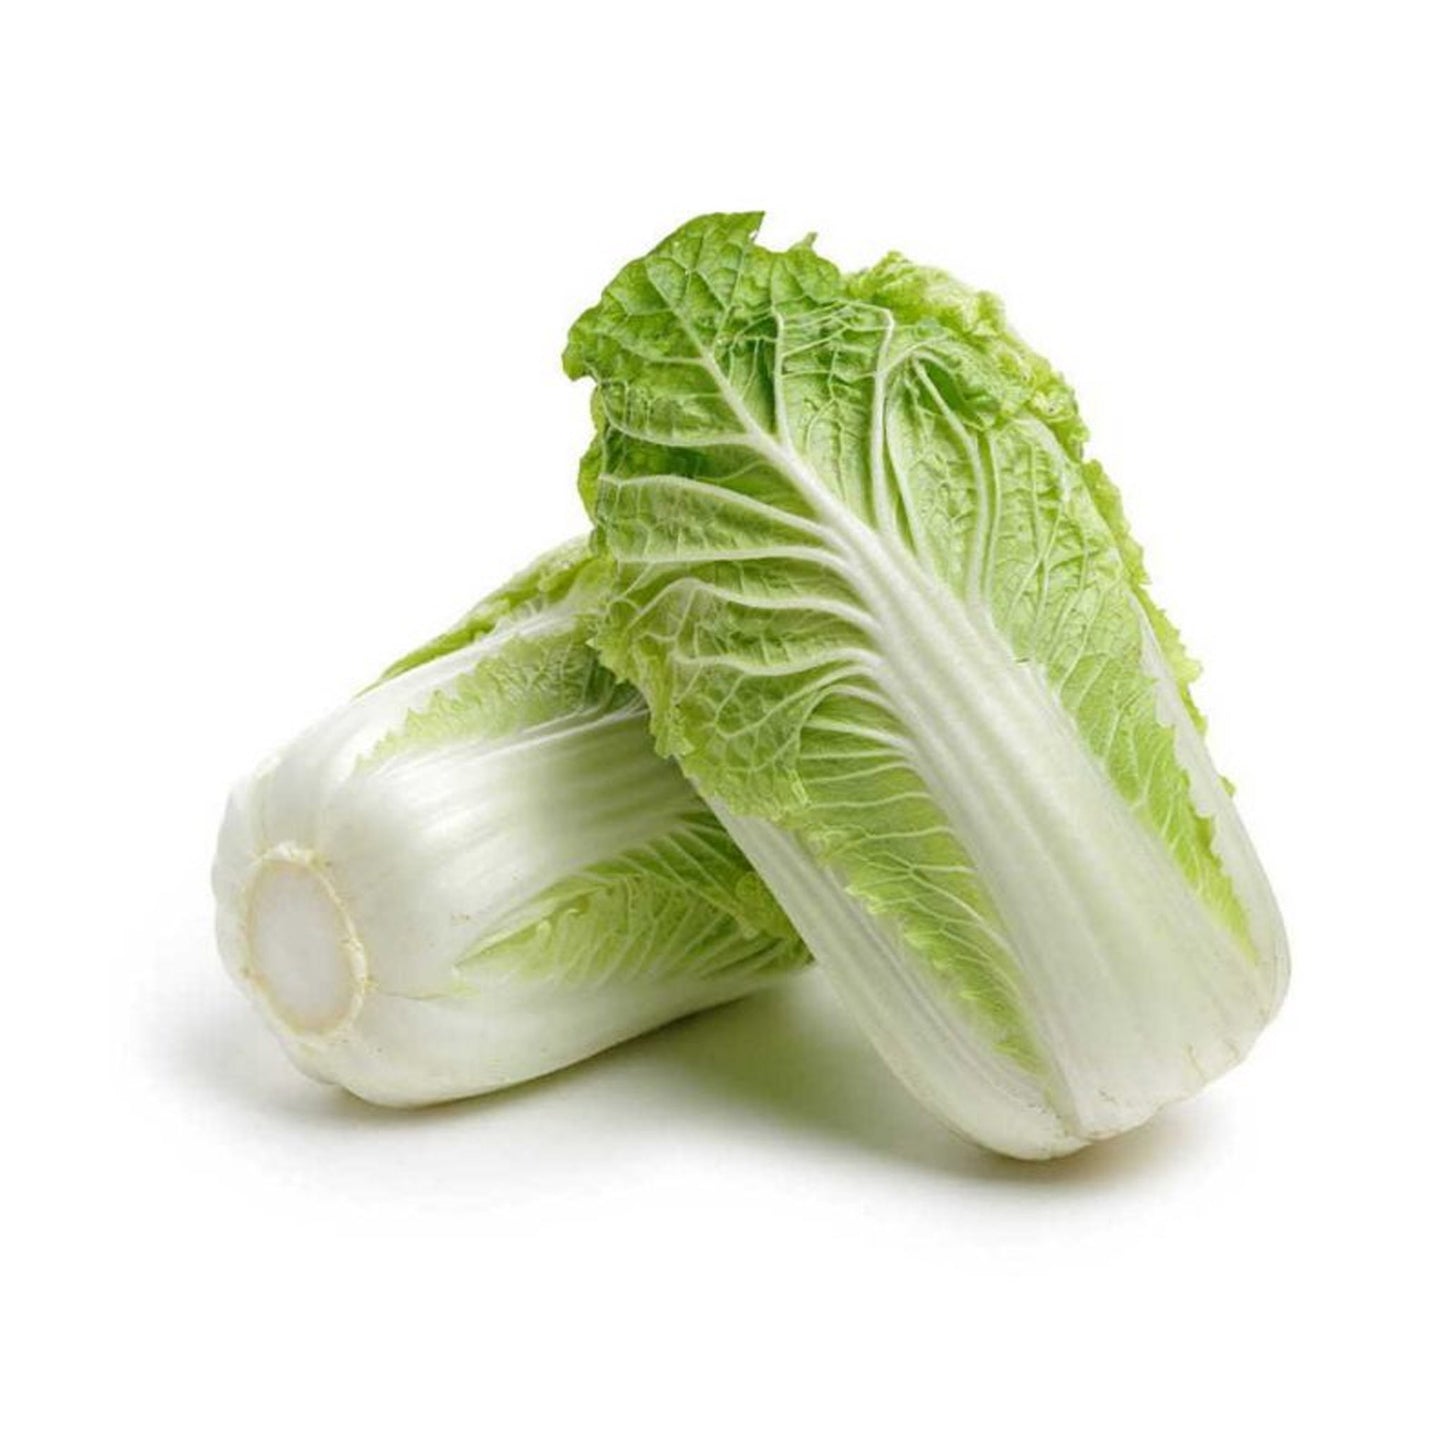 CHNESE CABBAGE (kg)